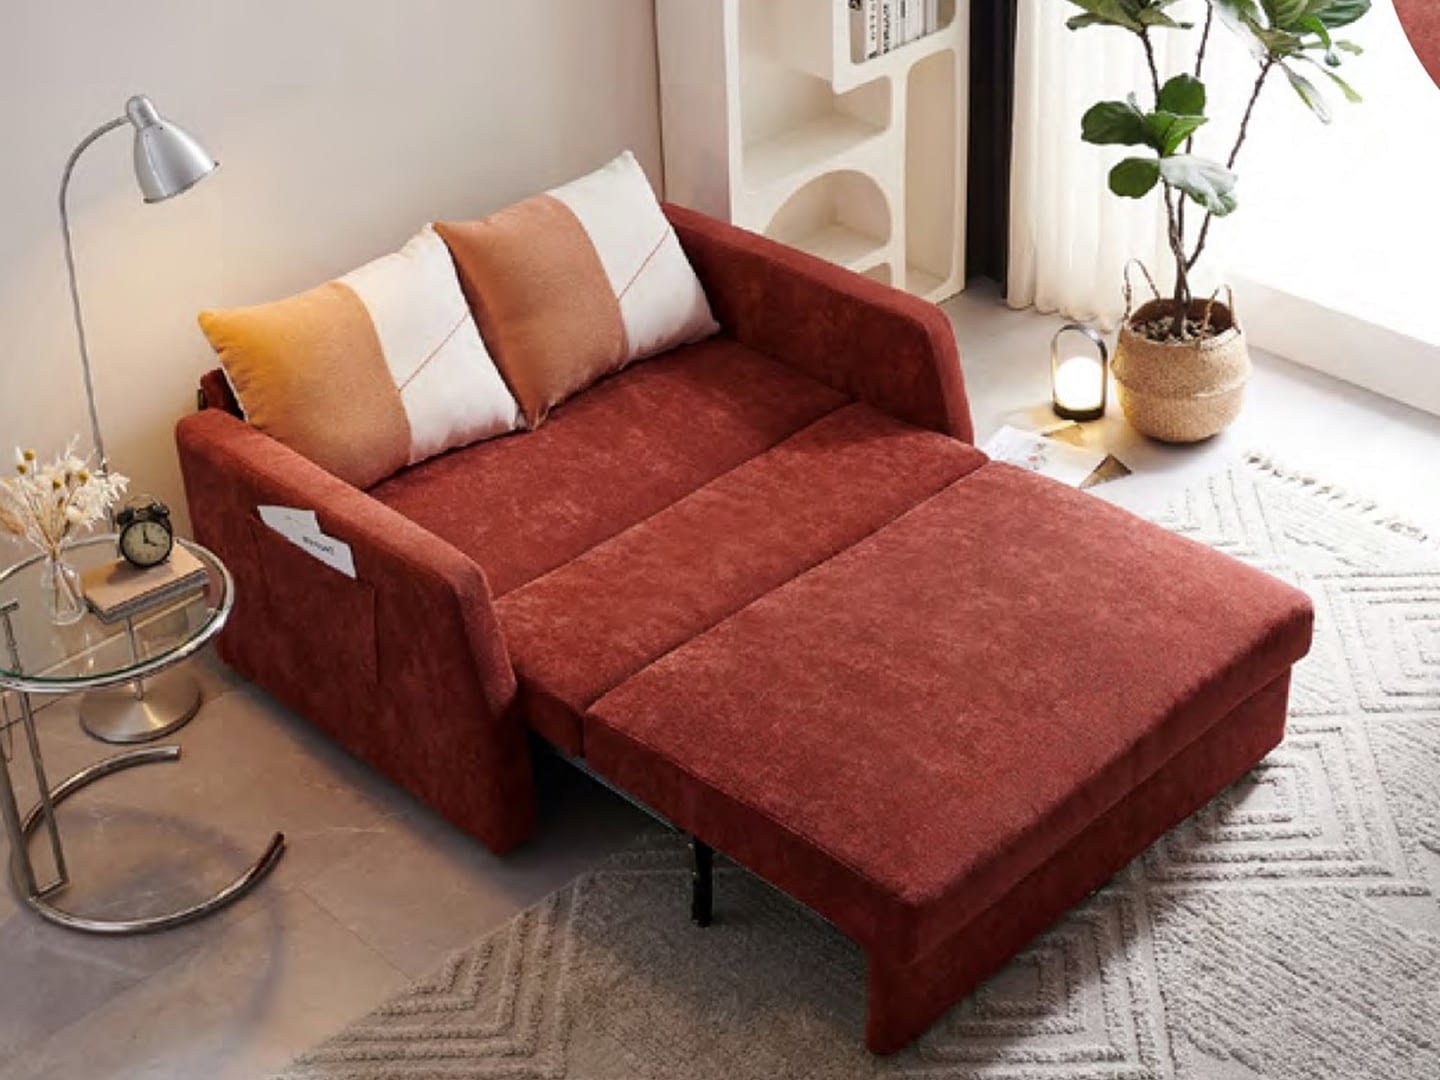 VALADOSTA Sofa Bed - Twin Bed